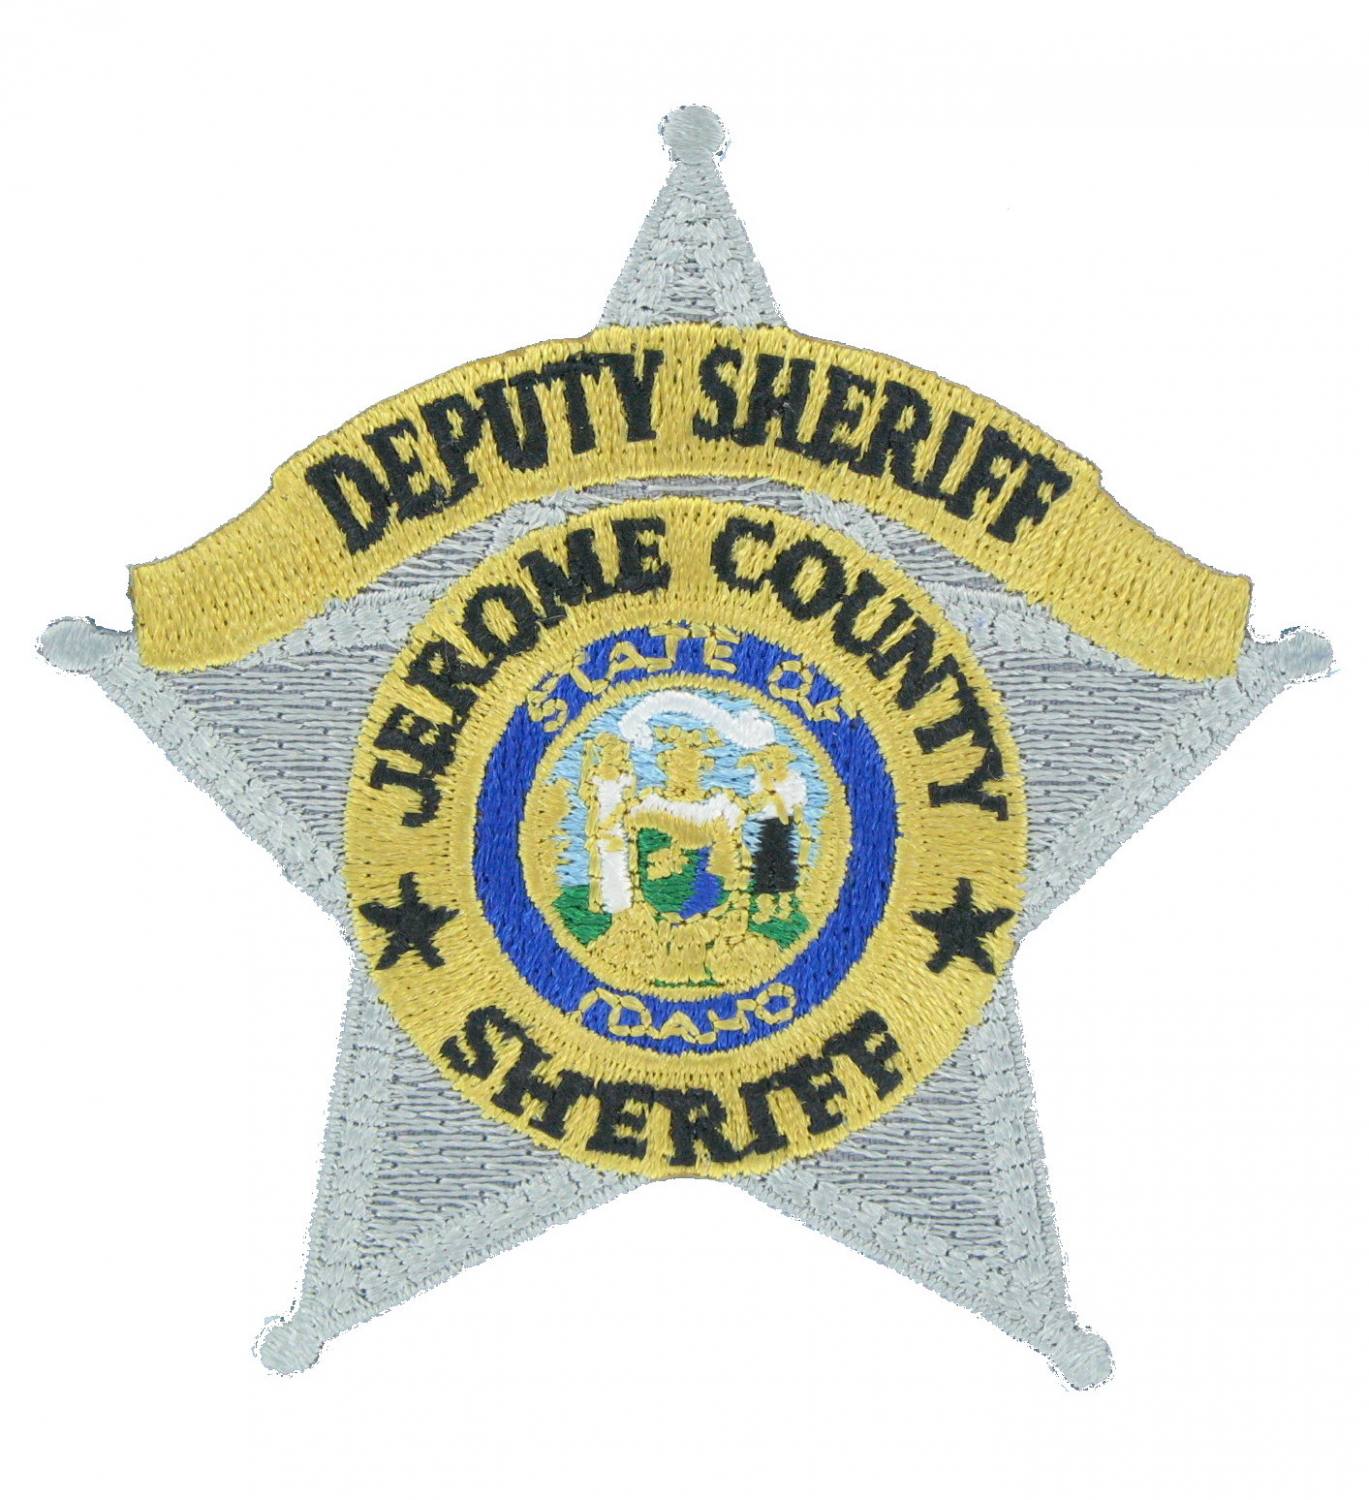 Sheriff Badge patch